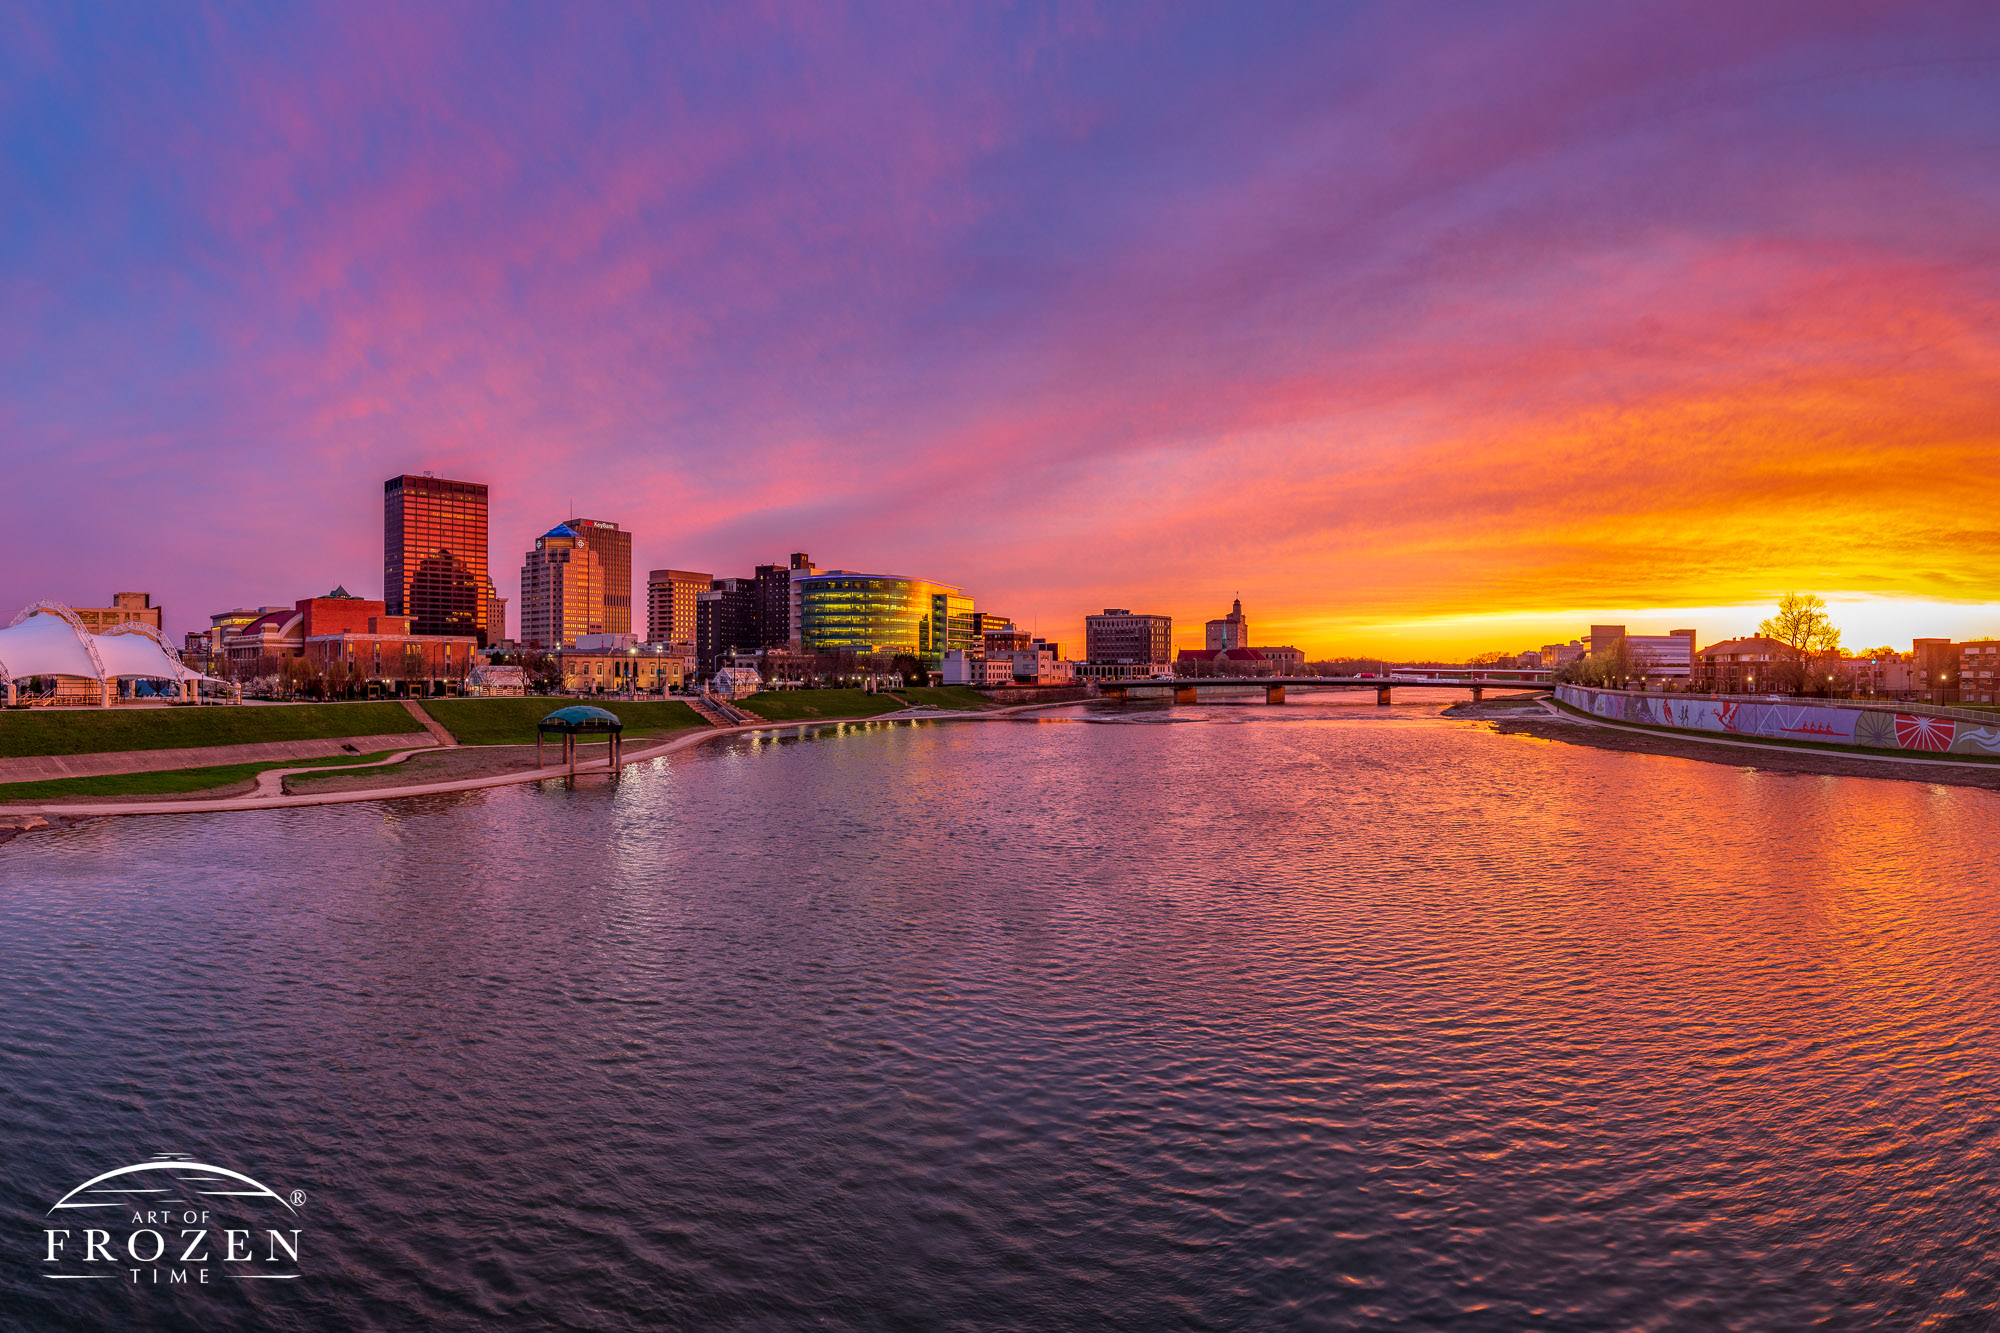 Colorful Dayton skyline sunset where the sun illuminated the clouds from underneath in warm colors as the Miami River took on interesting texture